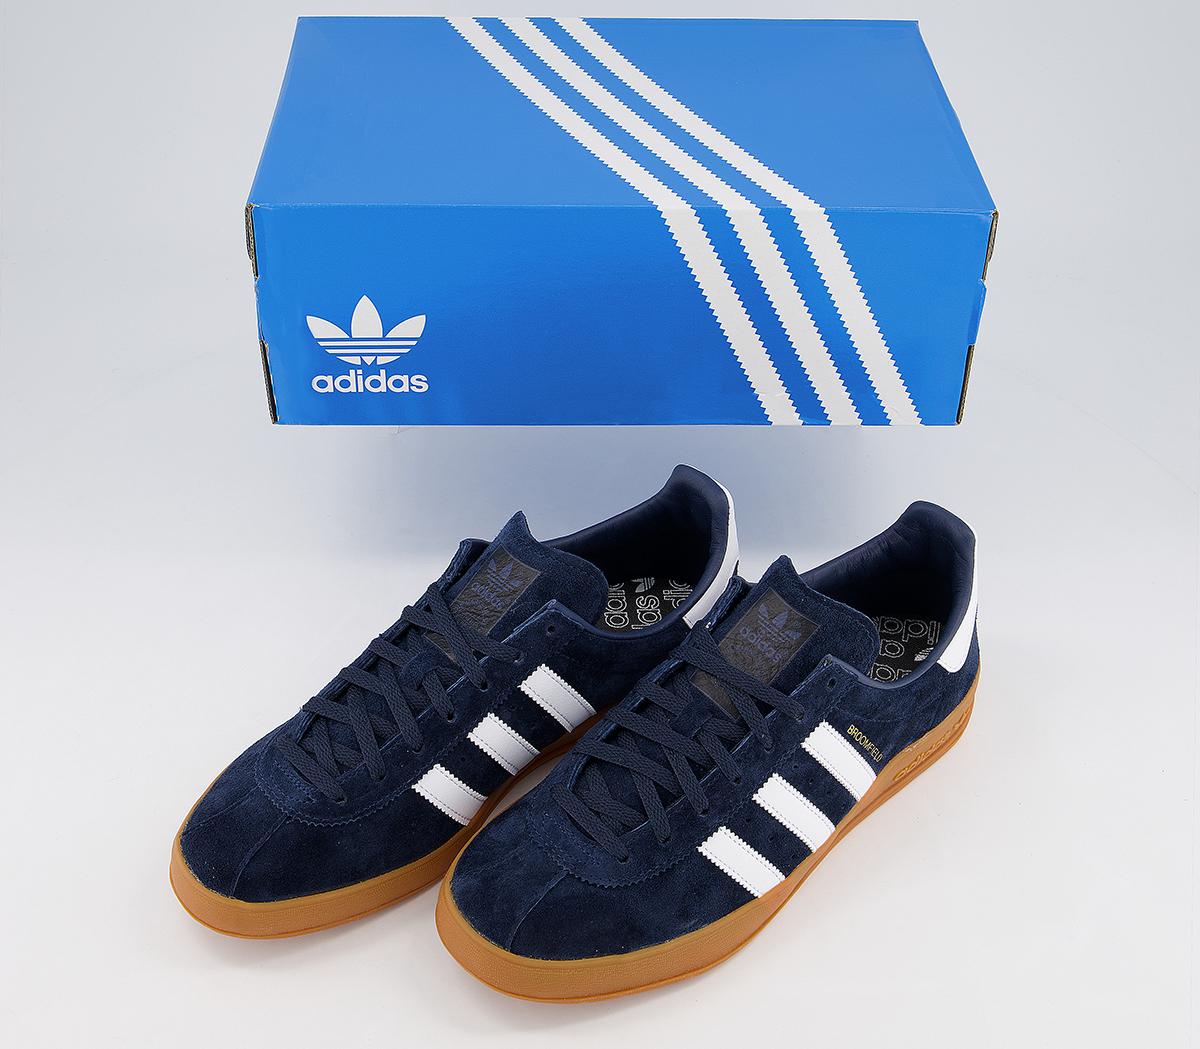 Adidas Broomfield Trainers Navy White Gum Exclusive His Trainers 6639